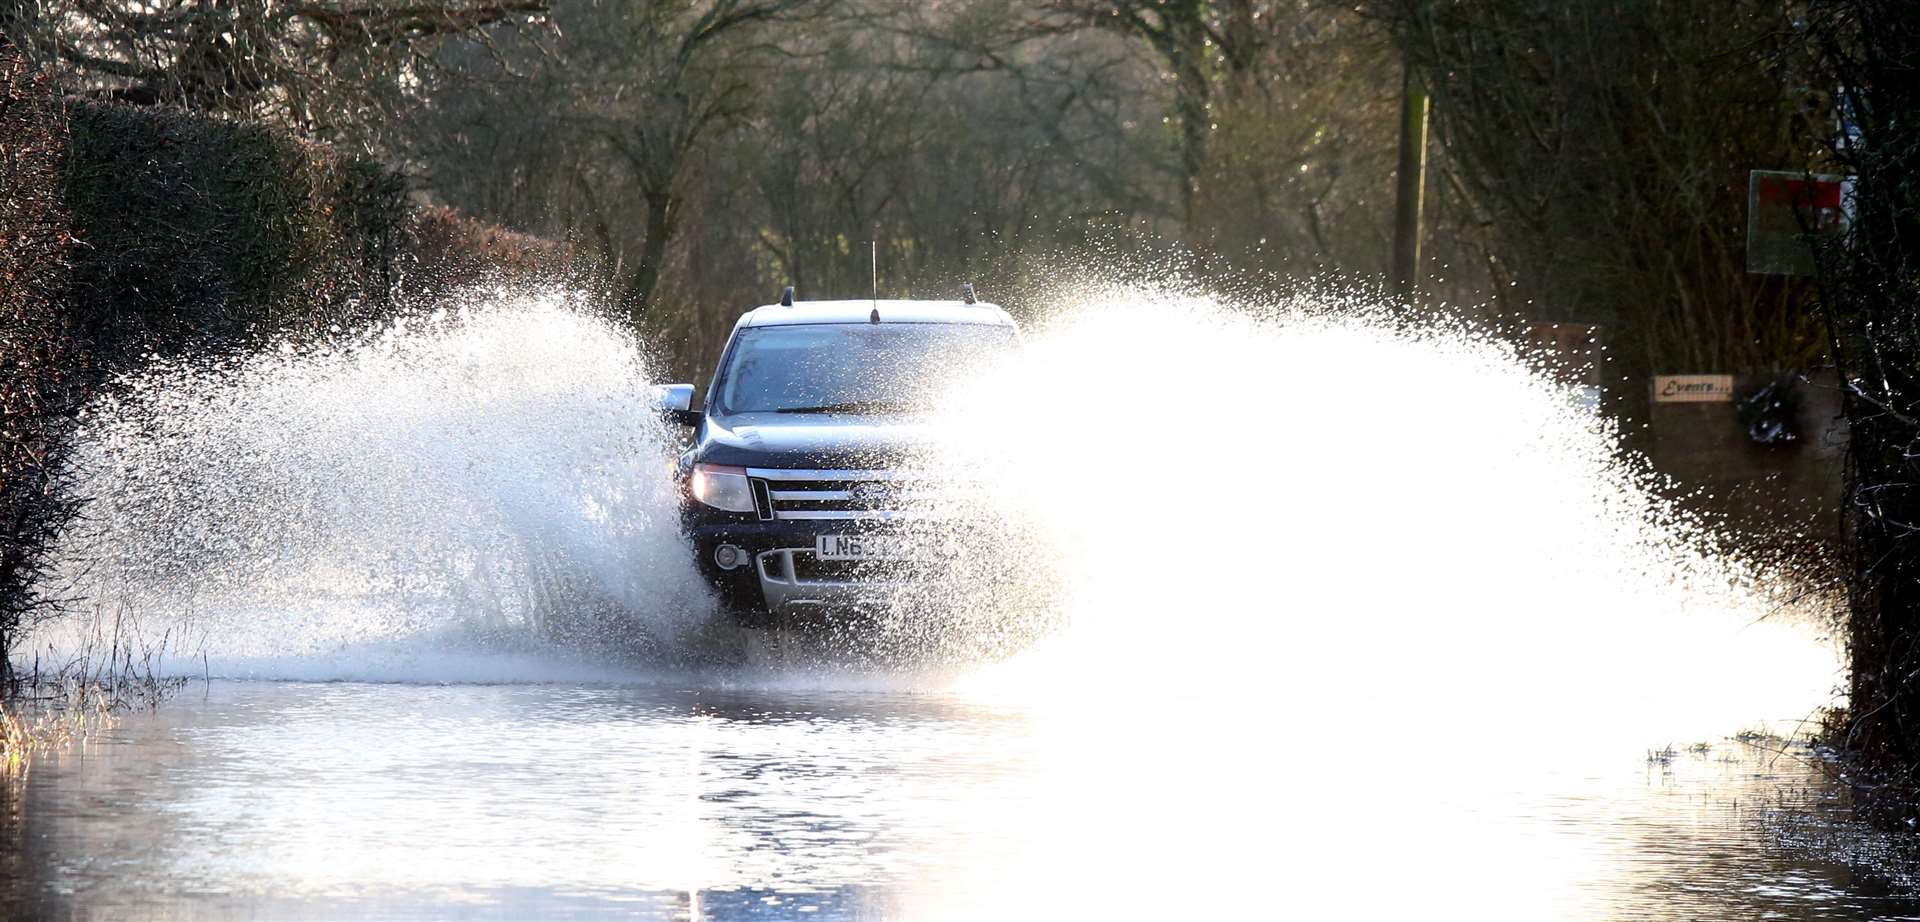 New Barn Road in Hawkenbury has shut because of flooding near Staplehurst. Picture: UK News in Pictures (26827715)